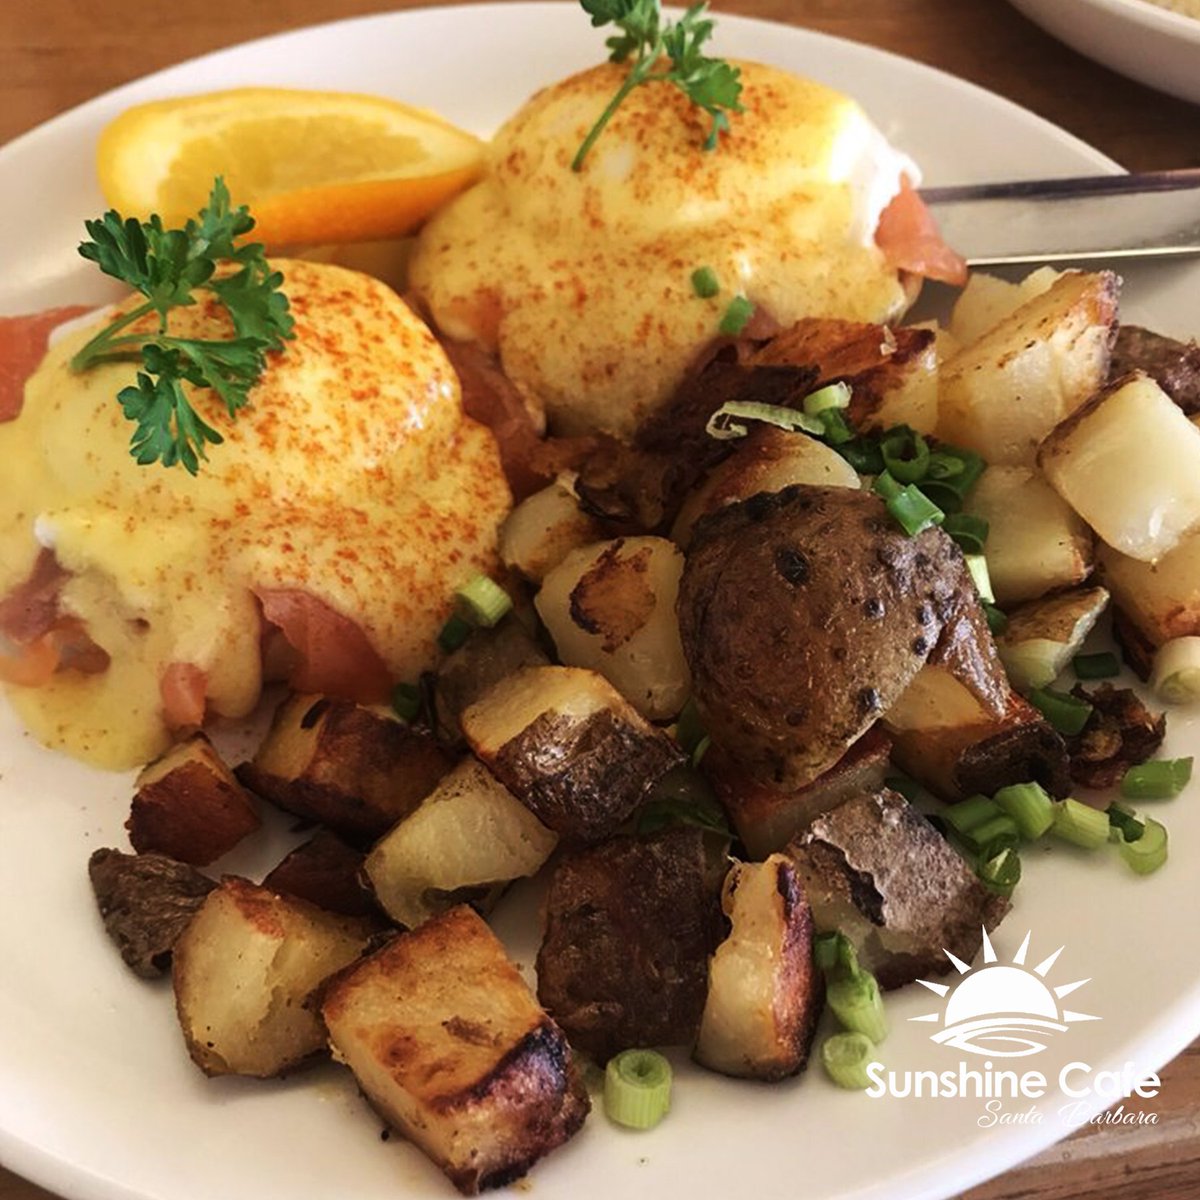 Our Smoked Salmon Benedict is a popular breakfast/ brunch item on our menu. Give it a try and see why its our favorite!😁

#SBSunshineCafe #Breakfast #Brunch #SmokedSalmonBenedict #SantaBarbara #Servingupsunshine